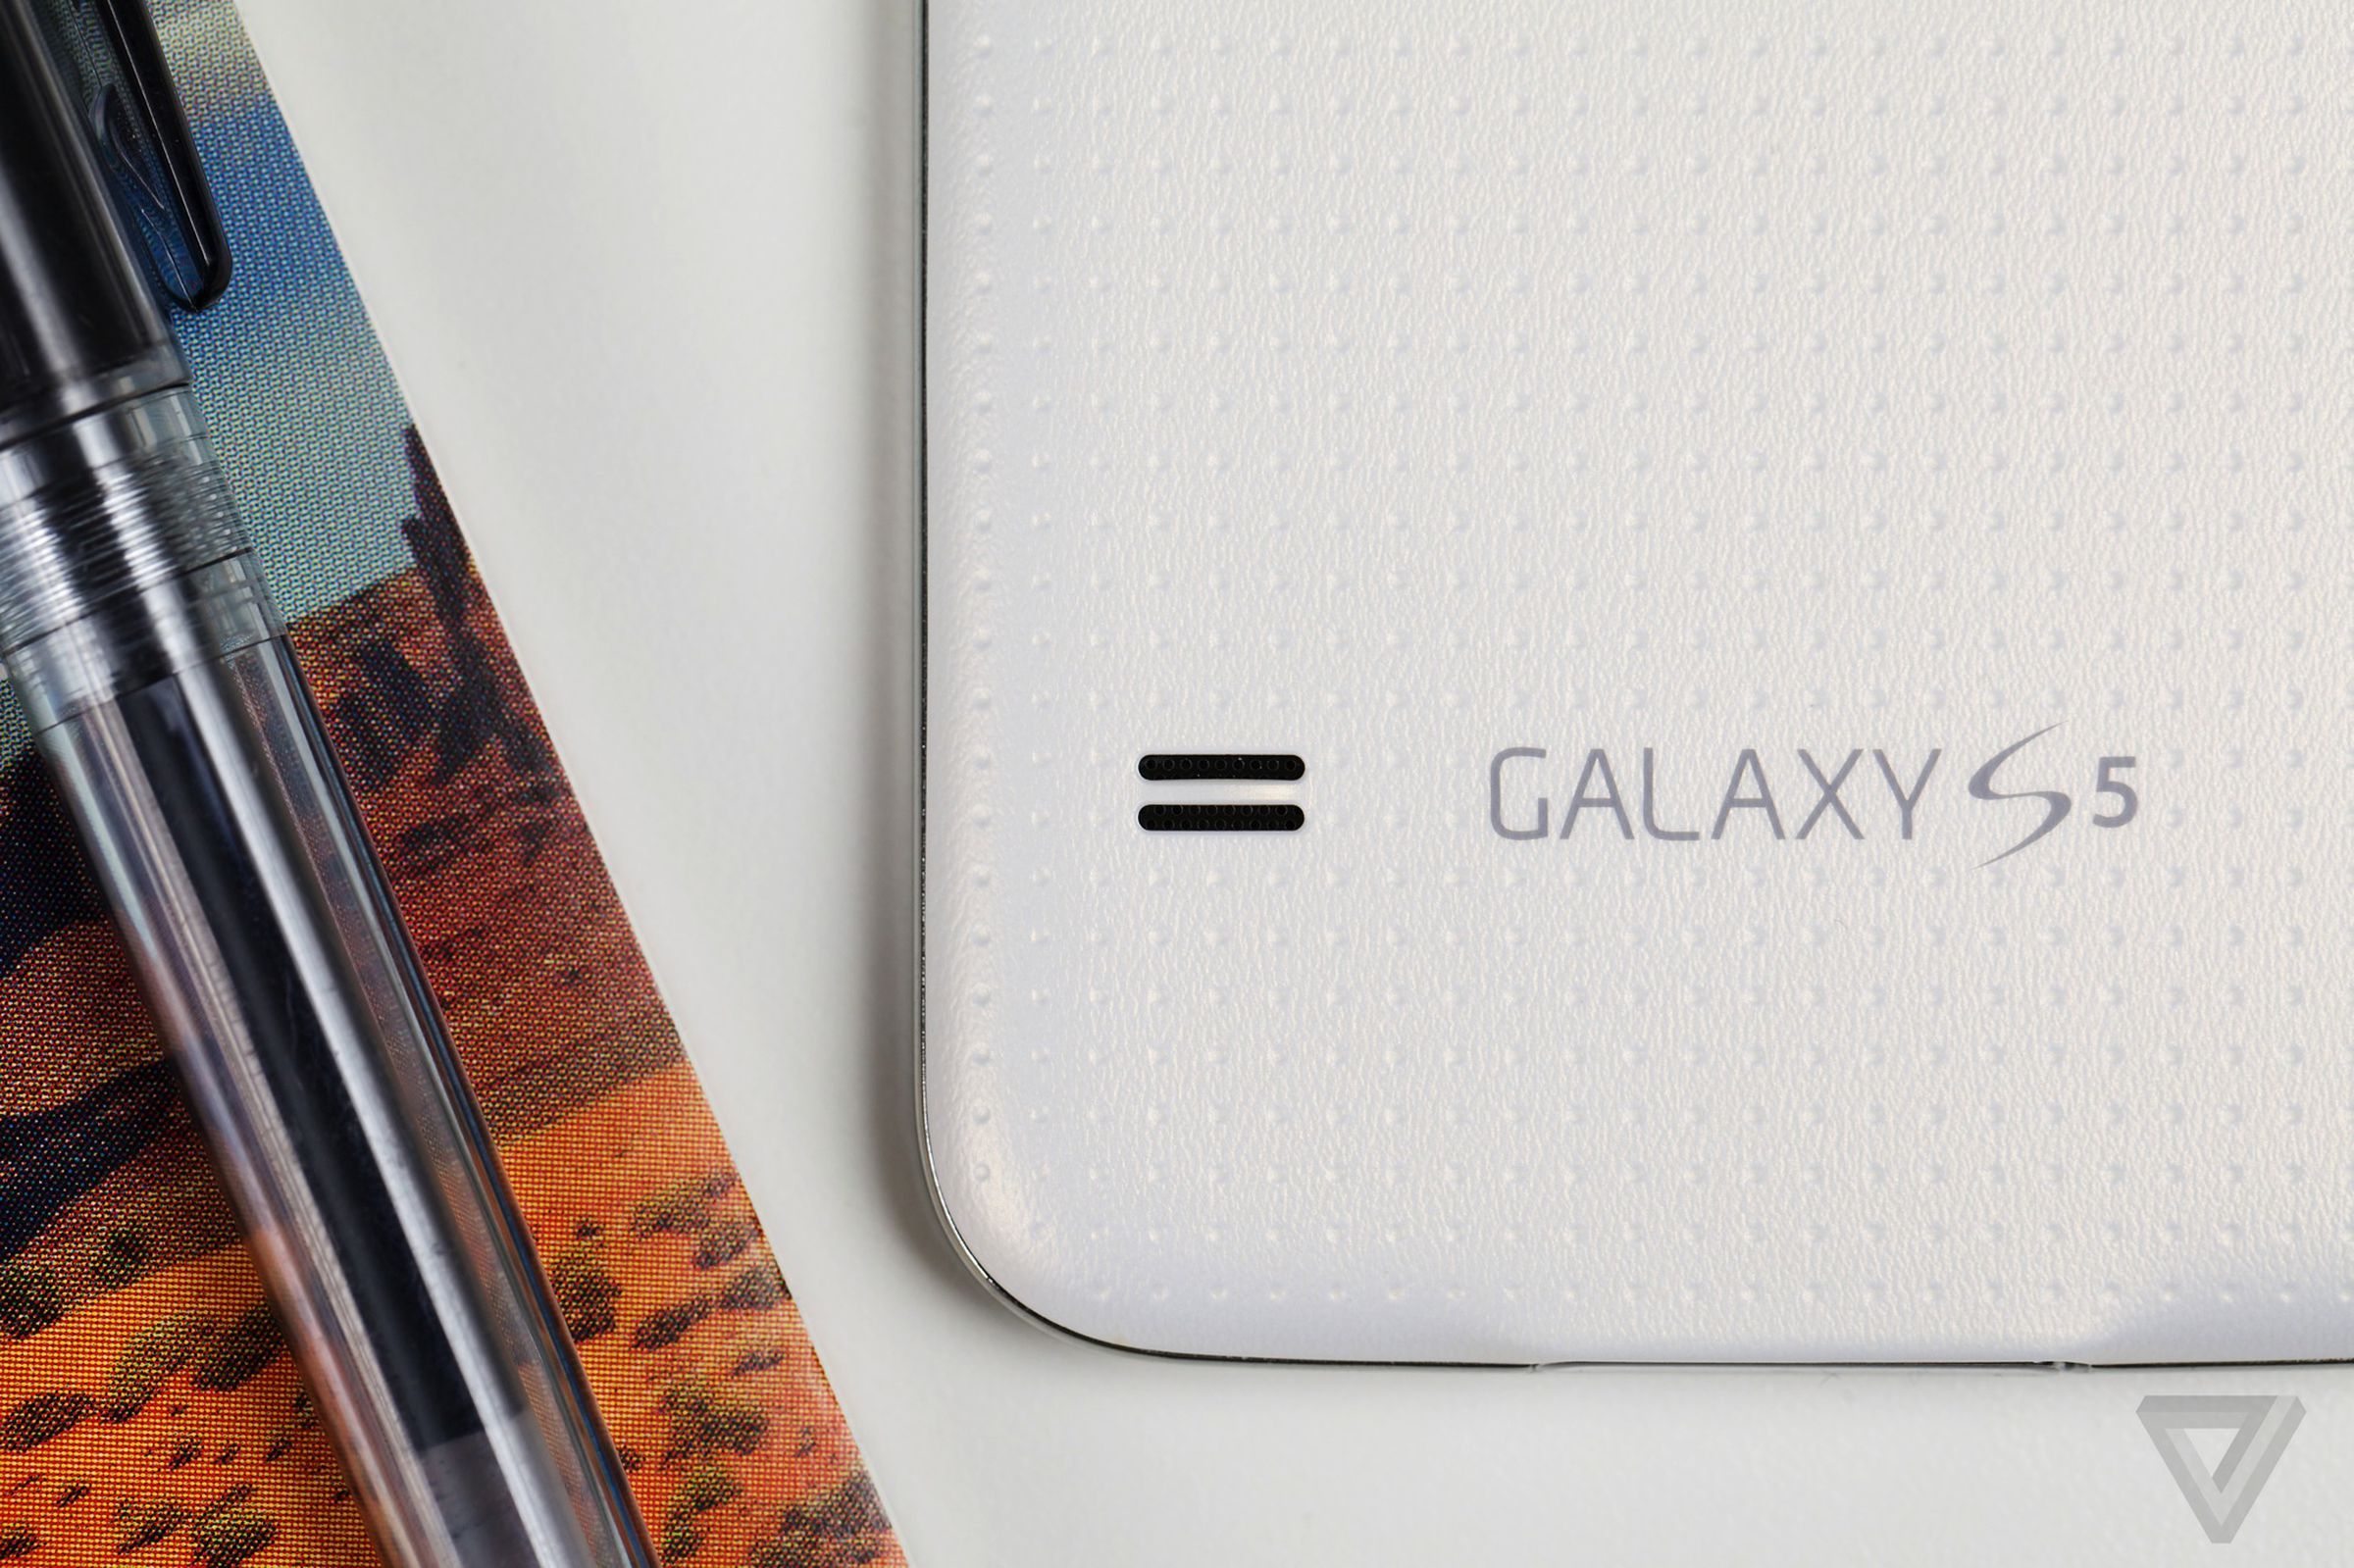 Samsung Galaxy S5 pictures